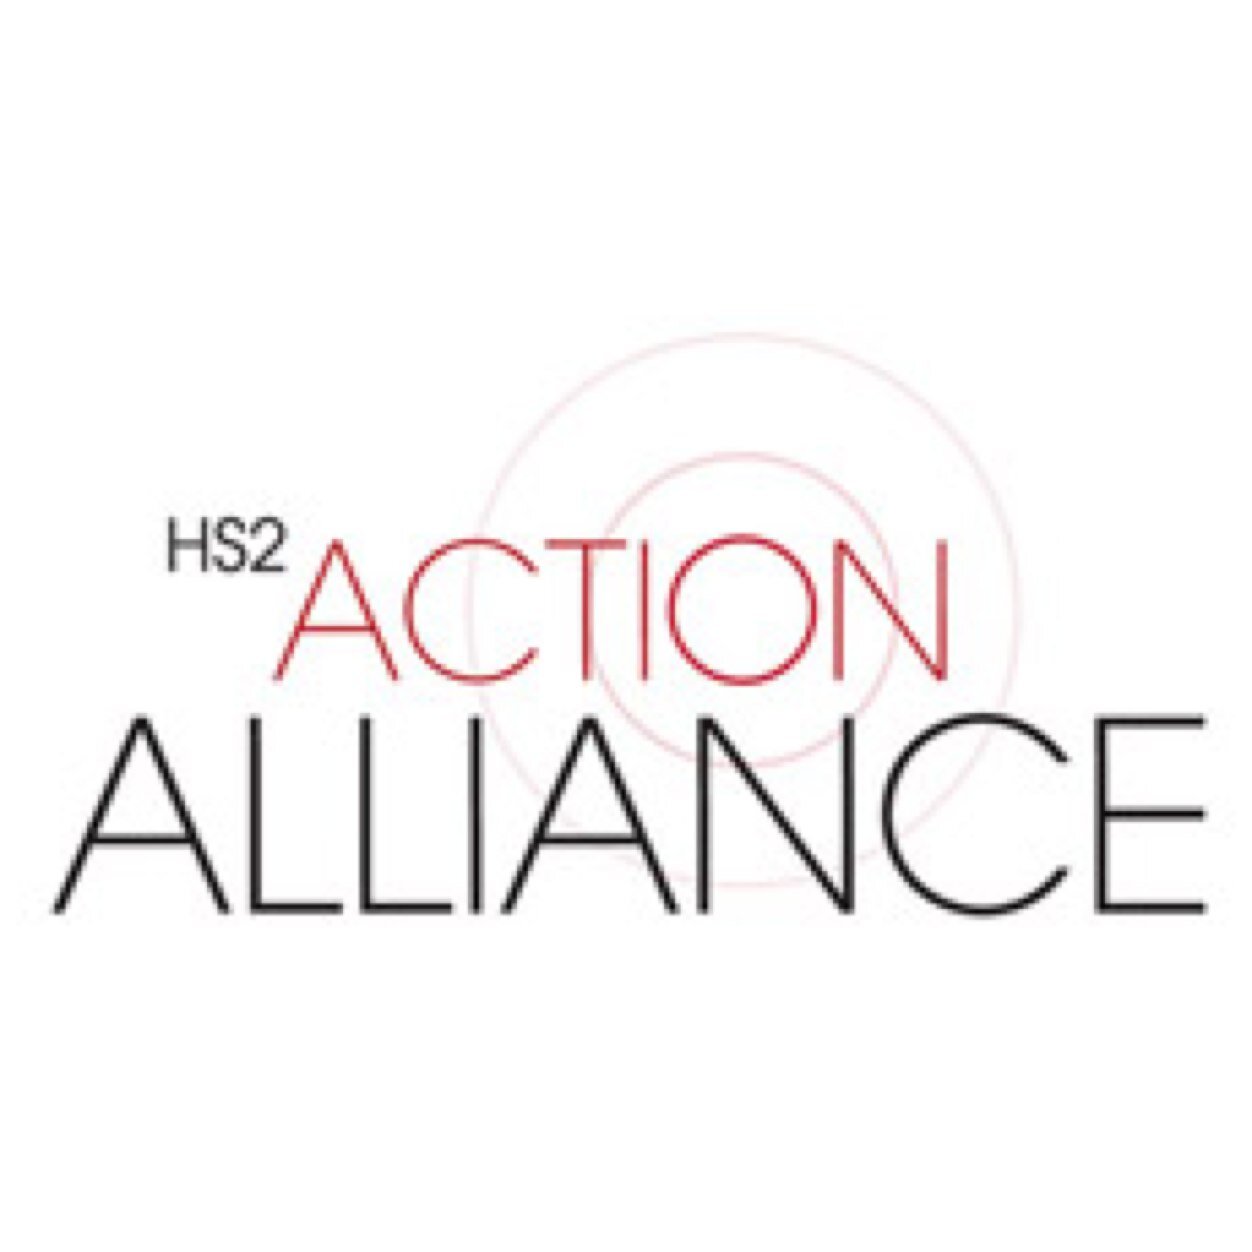 HS2 Action Alliance is a not for profit organisation which is challenging the case for HS2 and working to get Government to take the right decisions.